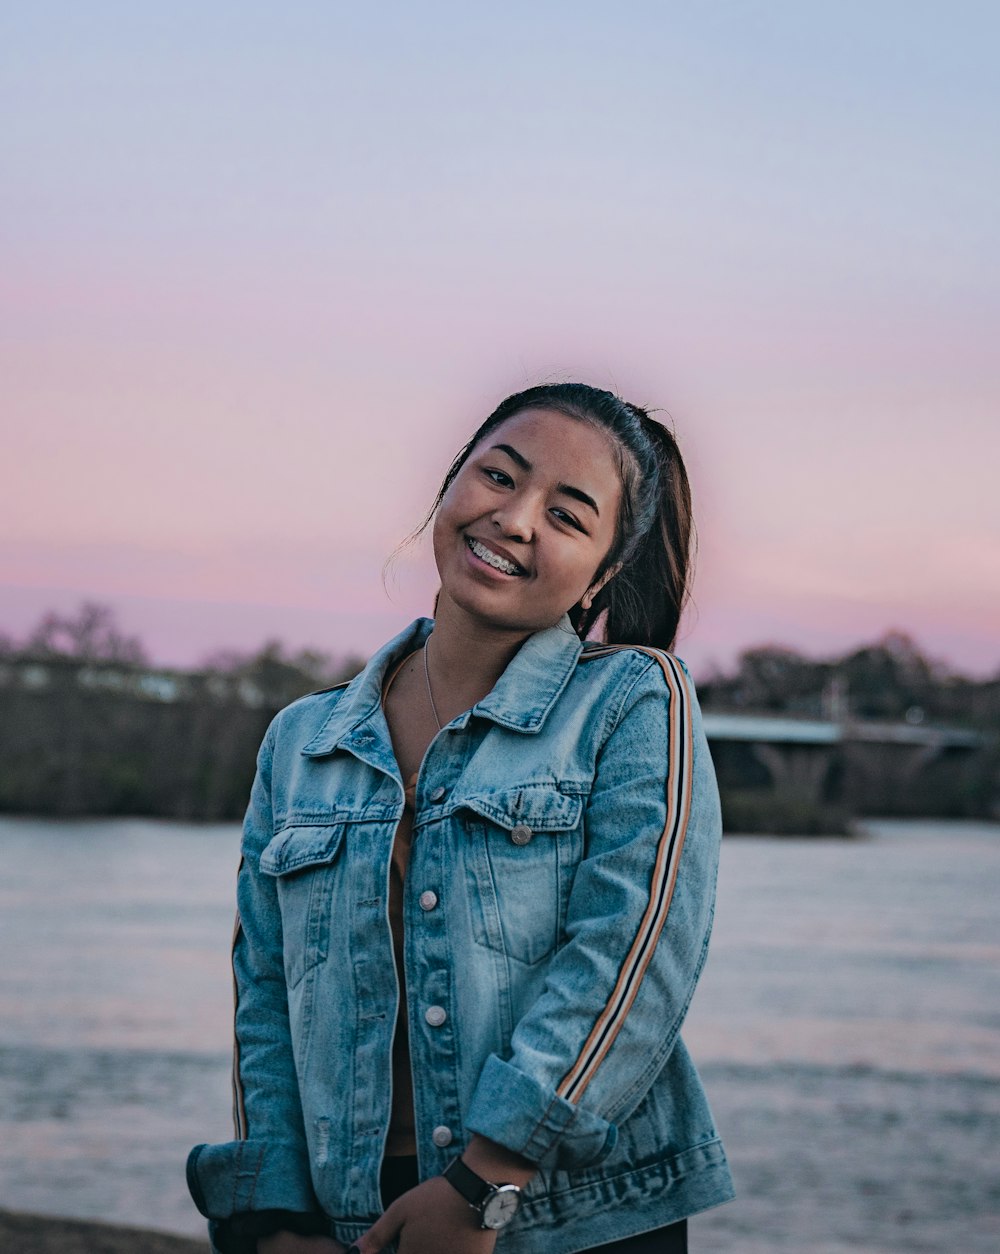 smiling woman in blue denim jacket by body of water